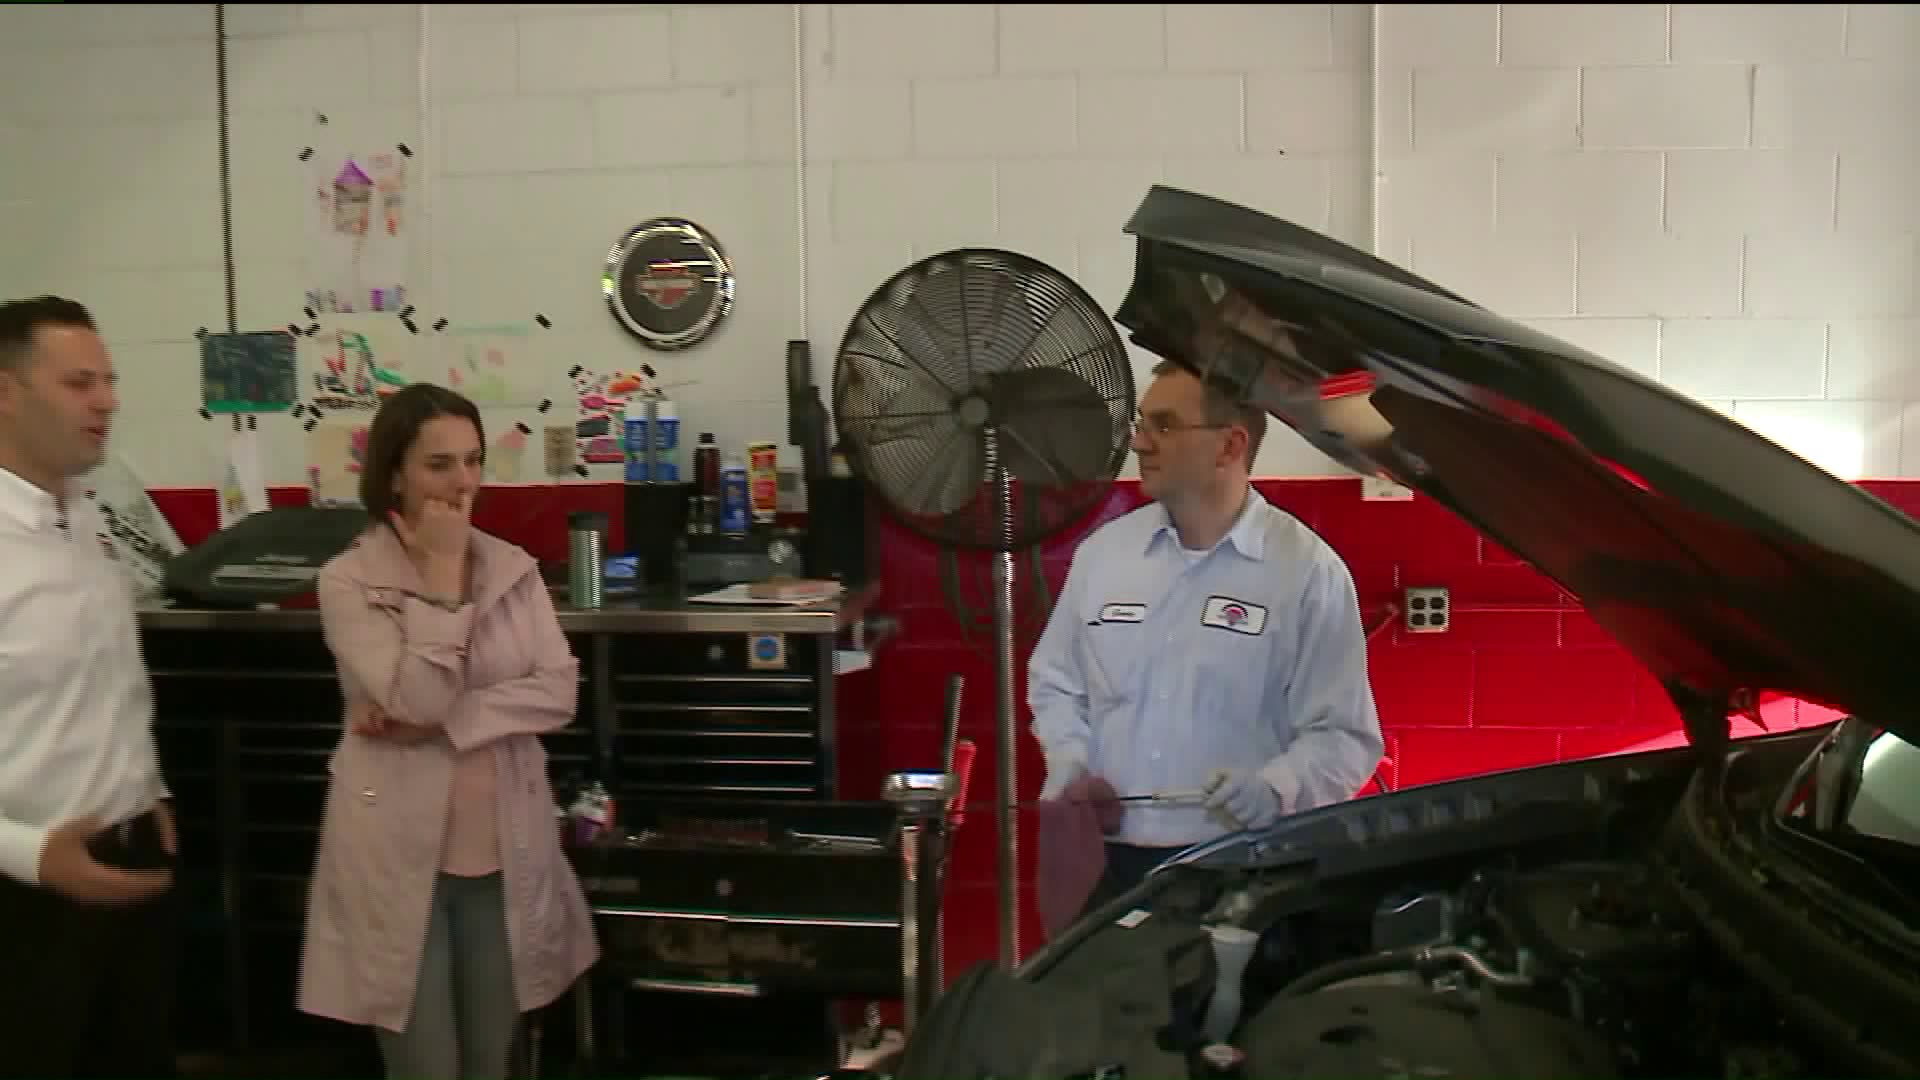 Around Town checks out HEART Certified Auto Care just in time for Memorial Day weekend